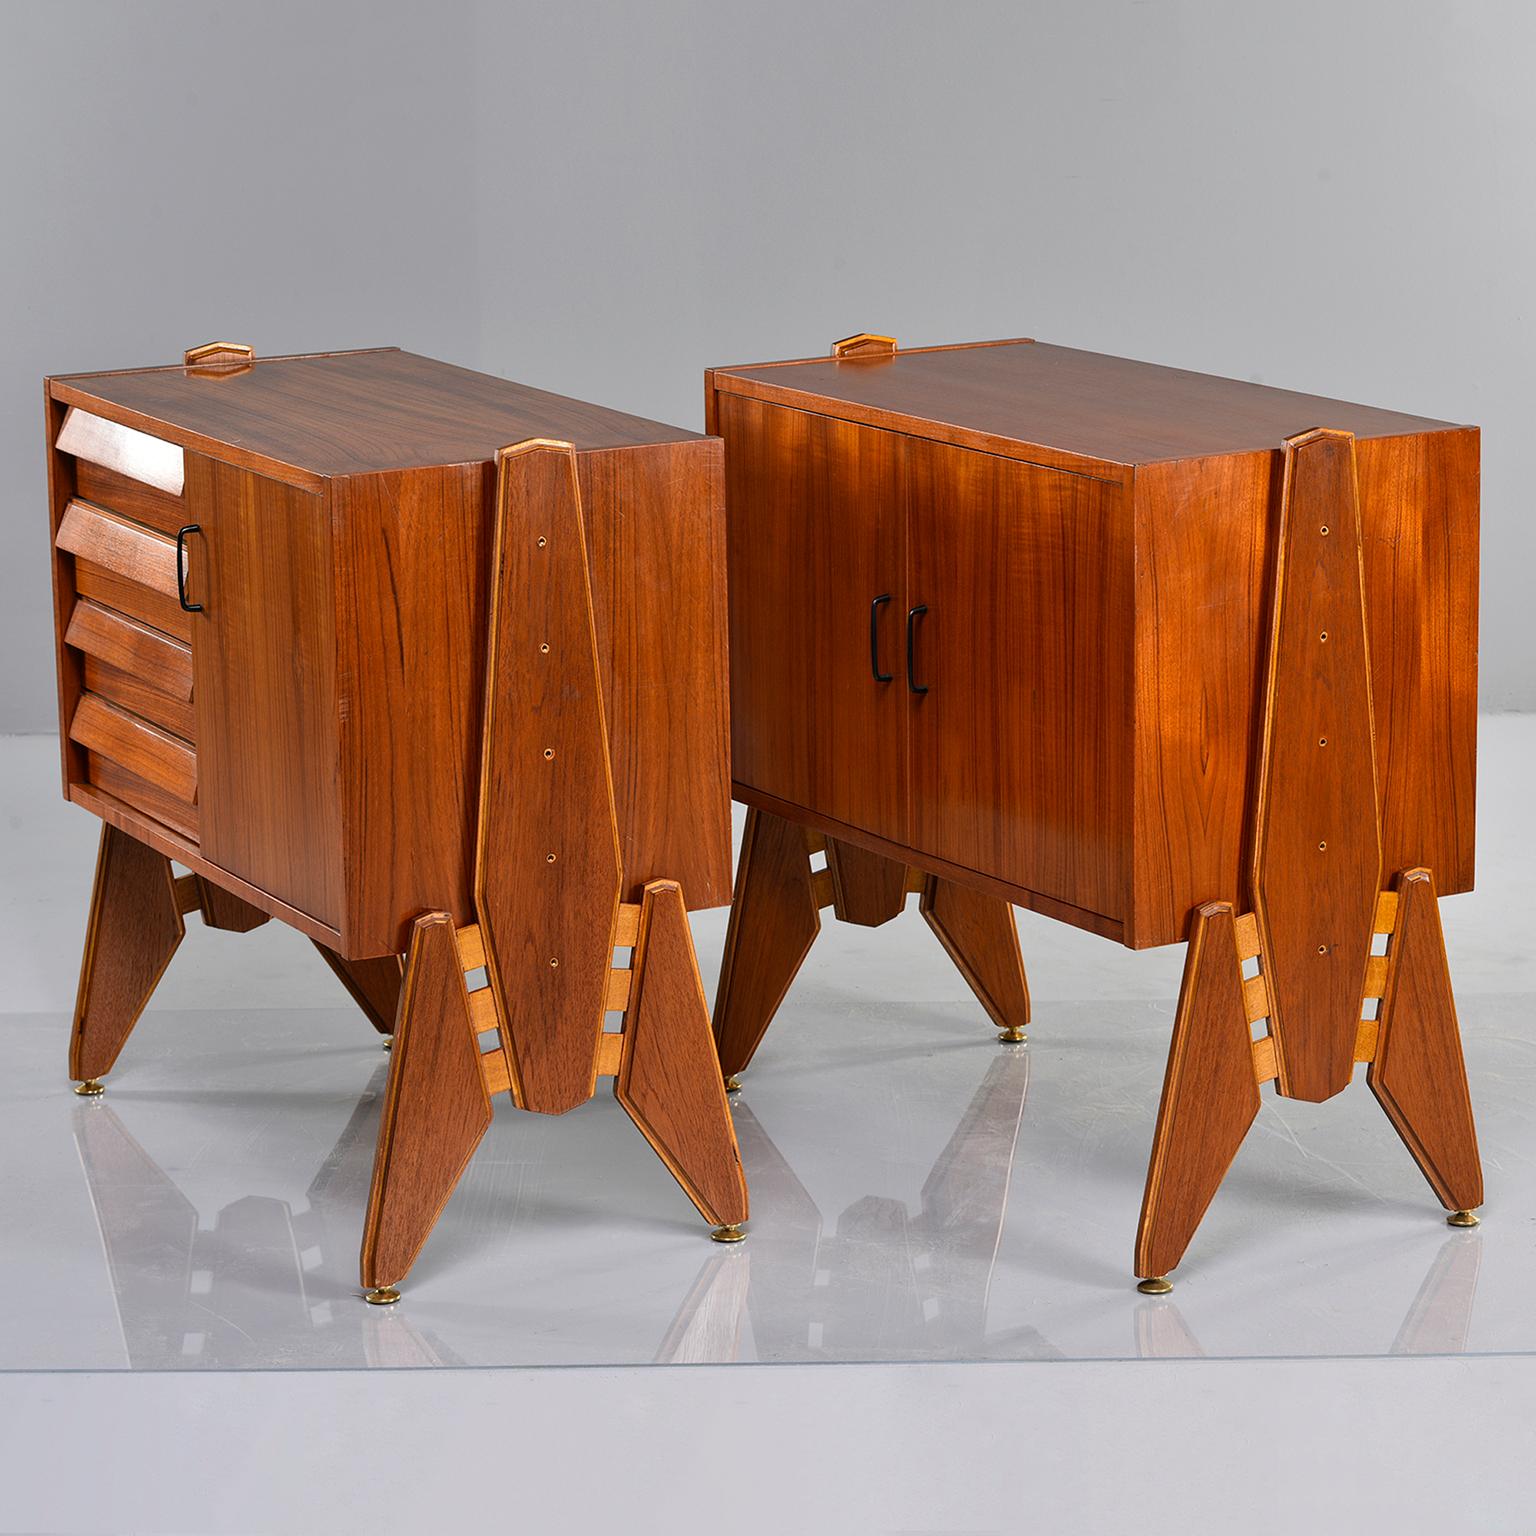 Pair of Italian teak side cabinets have interesting side mounted legs/supports that allow for height range between 31.5” and 27.5” Measurements shown are for cabinets as shown in photos, at their highest setting. One cabinet has four functional